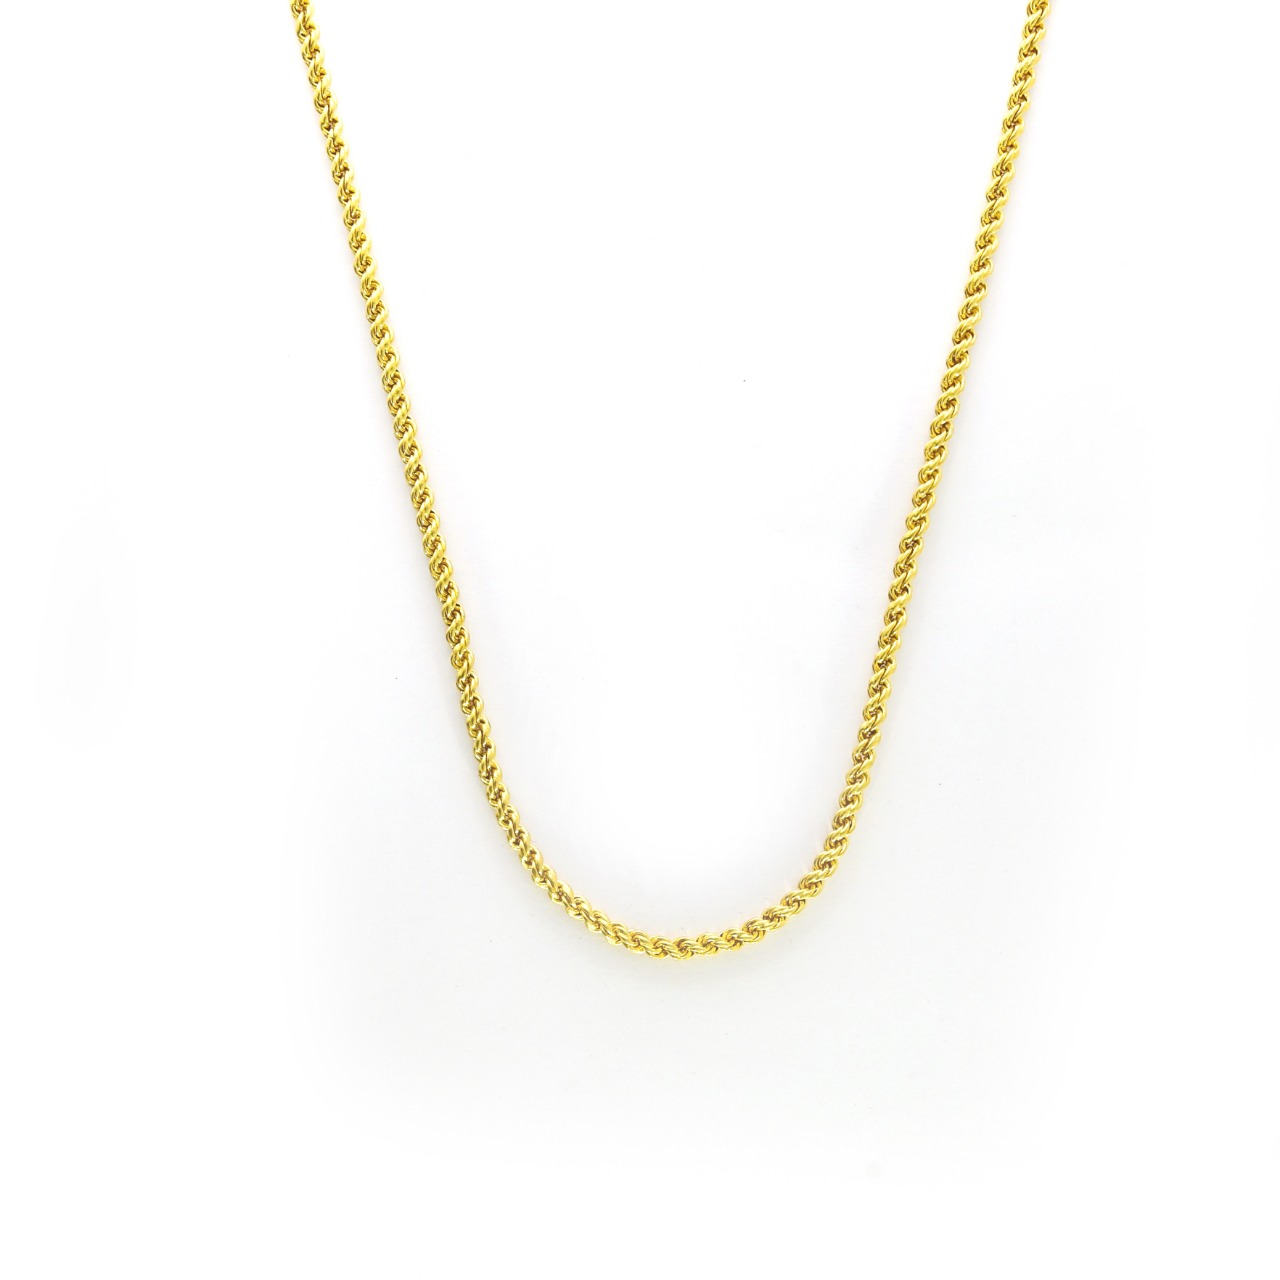 Exquisite Gold Rope Chain 22k For Men